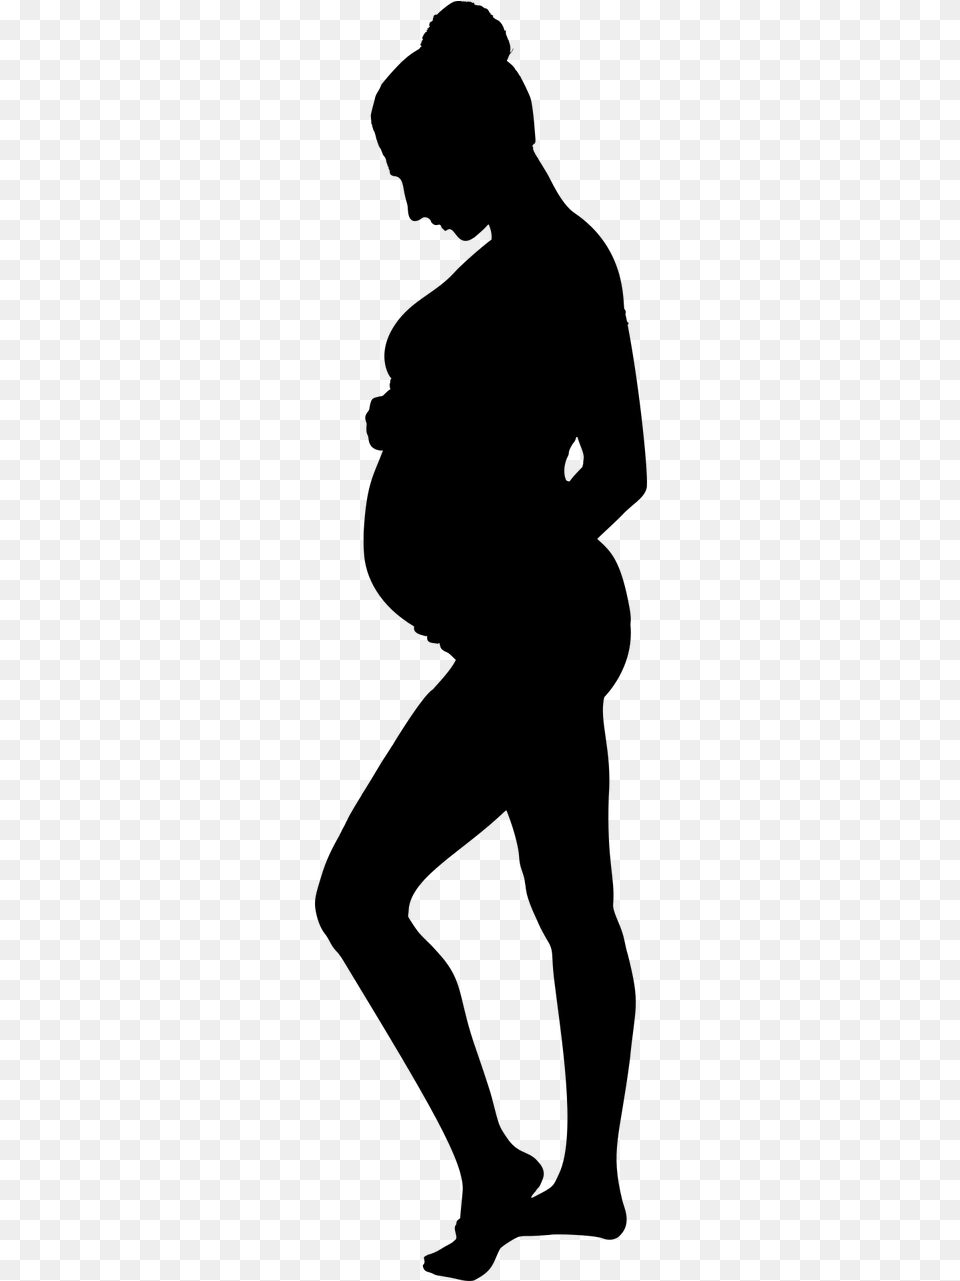 Pregnant Woman Silhouette Transparent, Gray Png Image